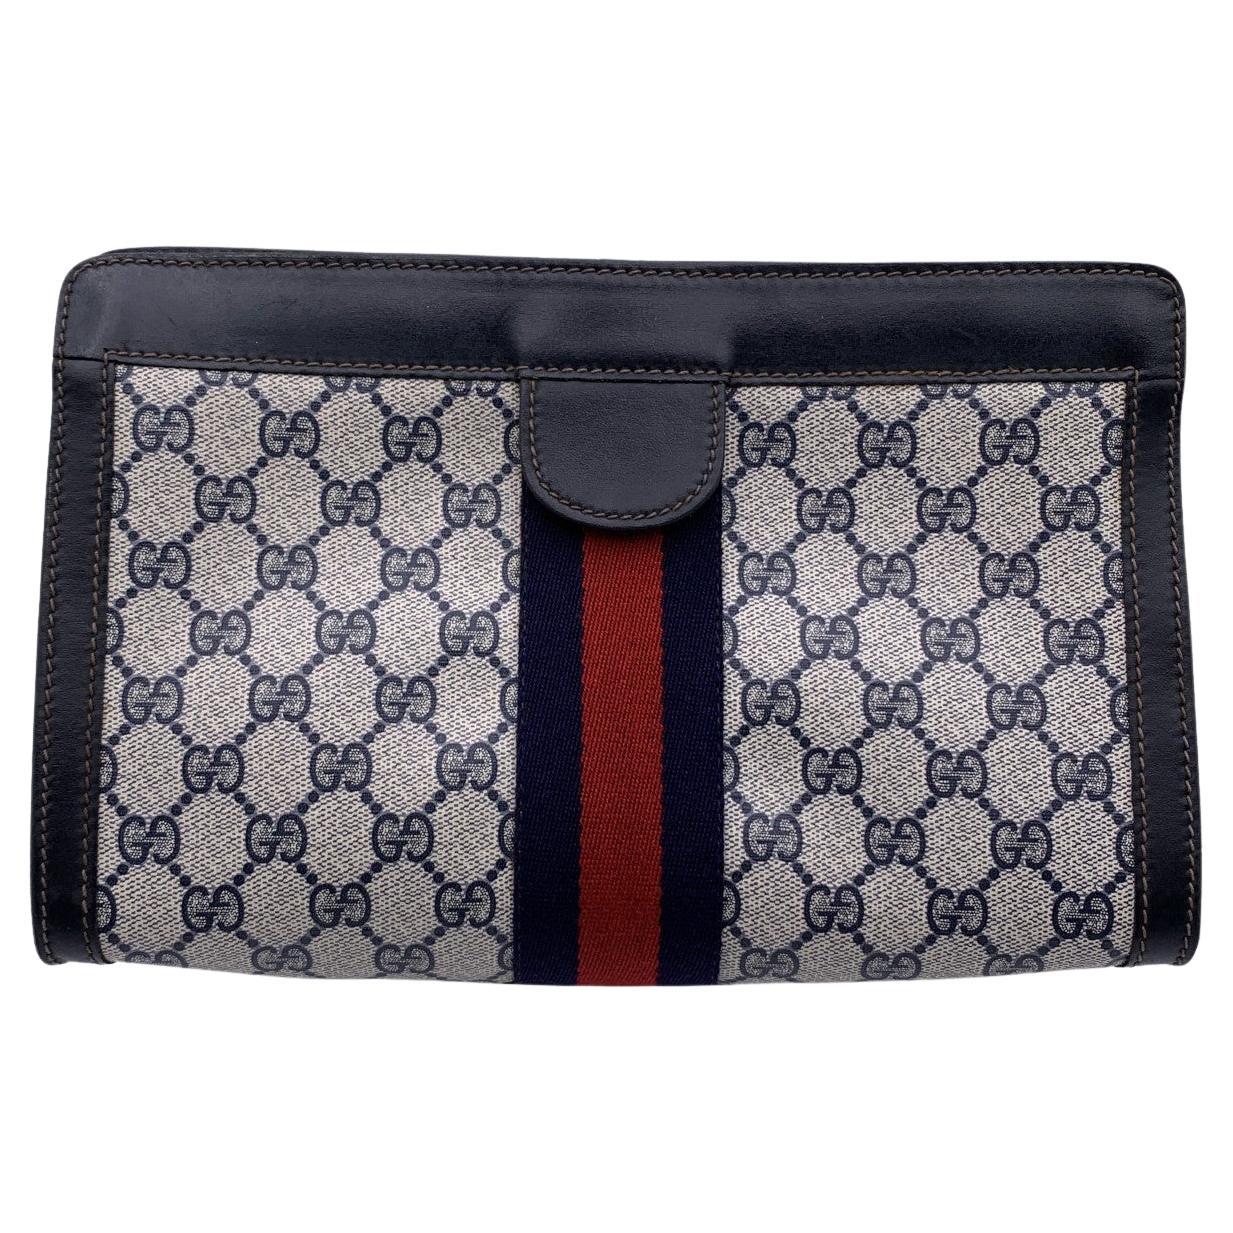 Gucci Vintage Blue Monogram Canvas Cosmetic Bag Clutch with Stripes